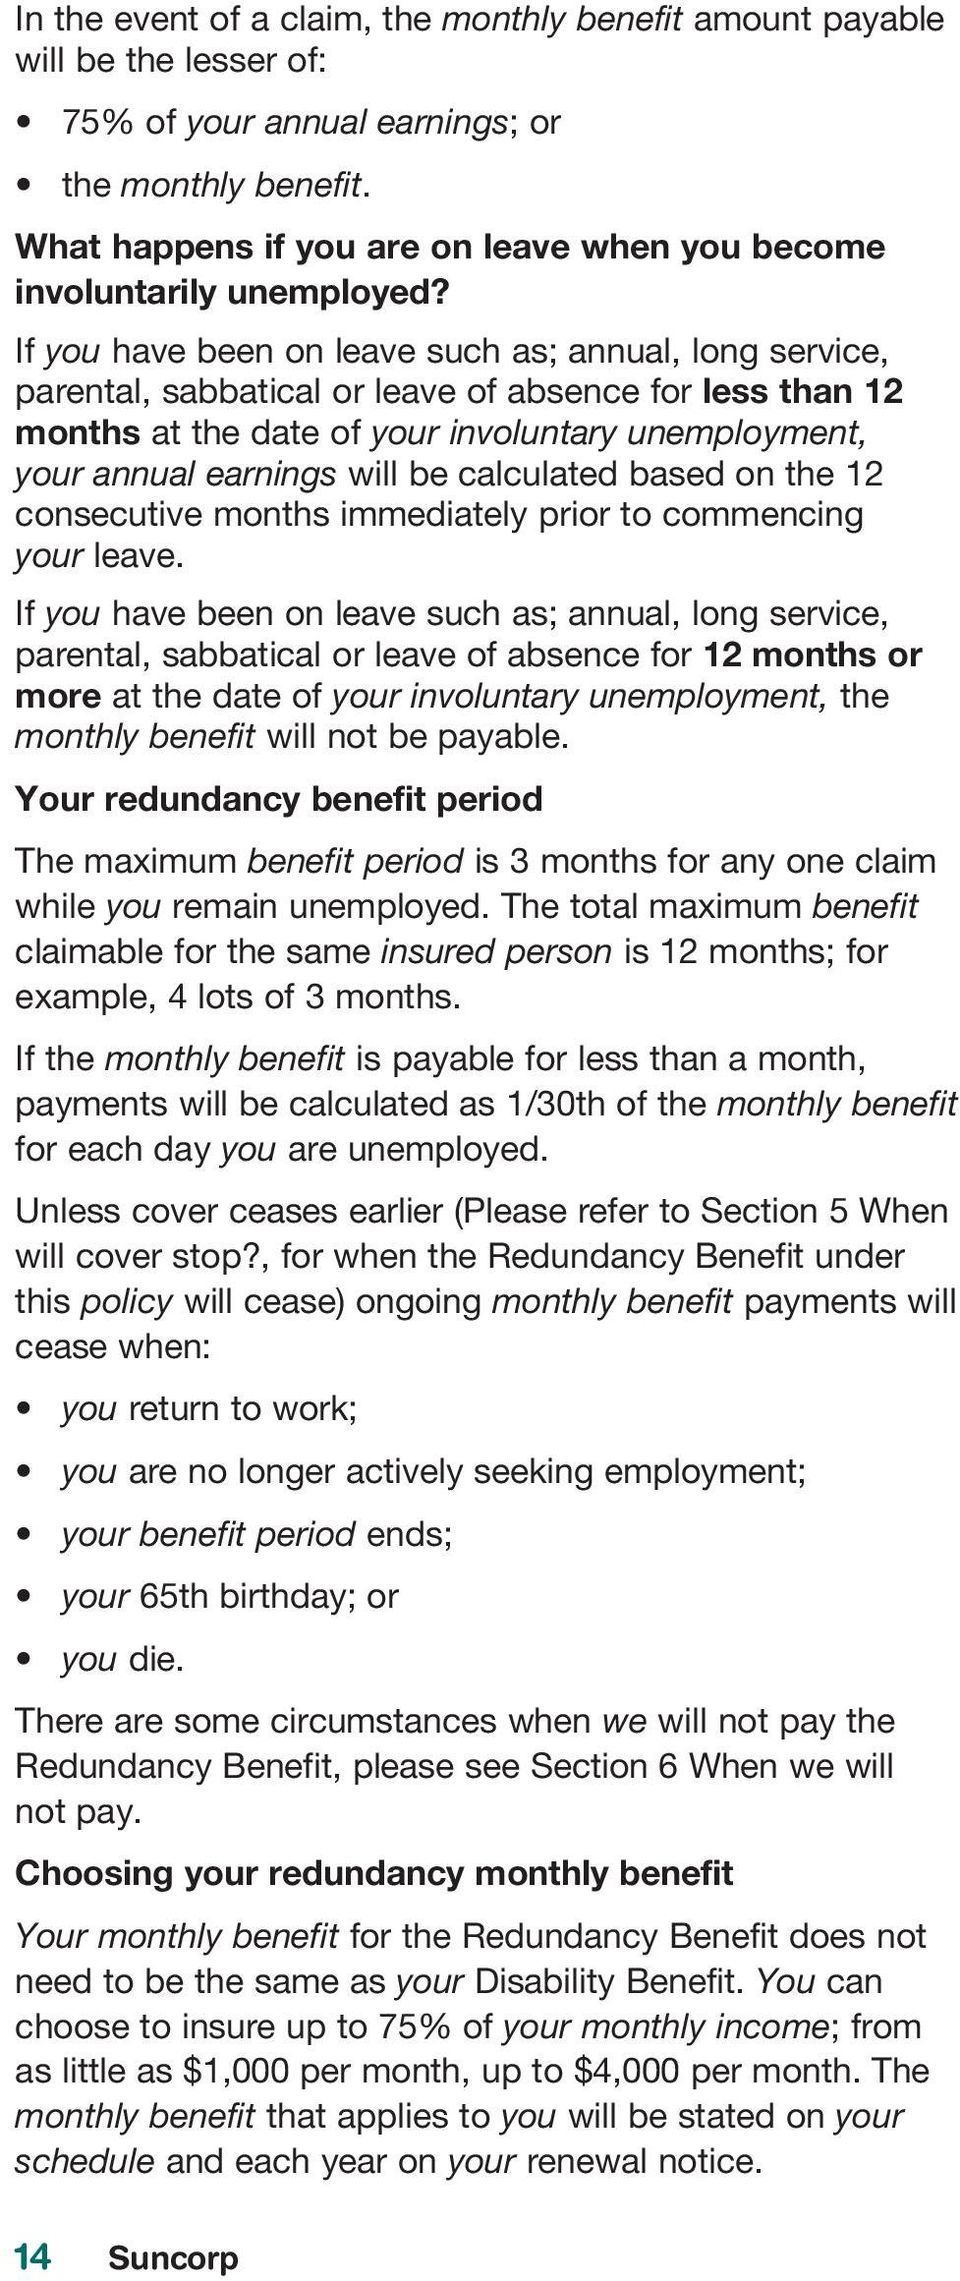 If you have been on leave such as; annual, long service, parental, sabbatical or leave of absence for less than 12 months at the date of your involuntary unemployment, your annual earnings will be